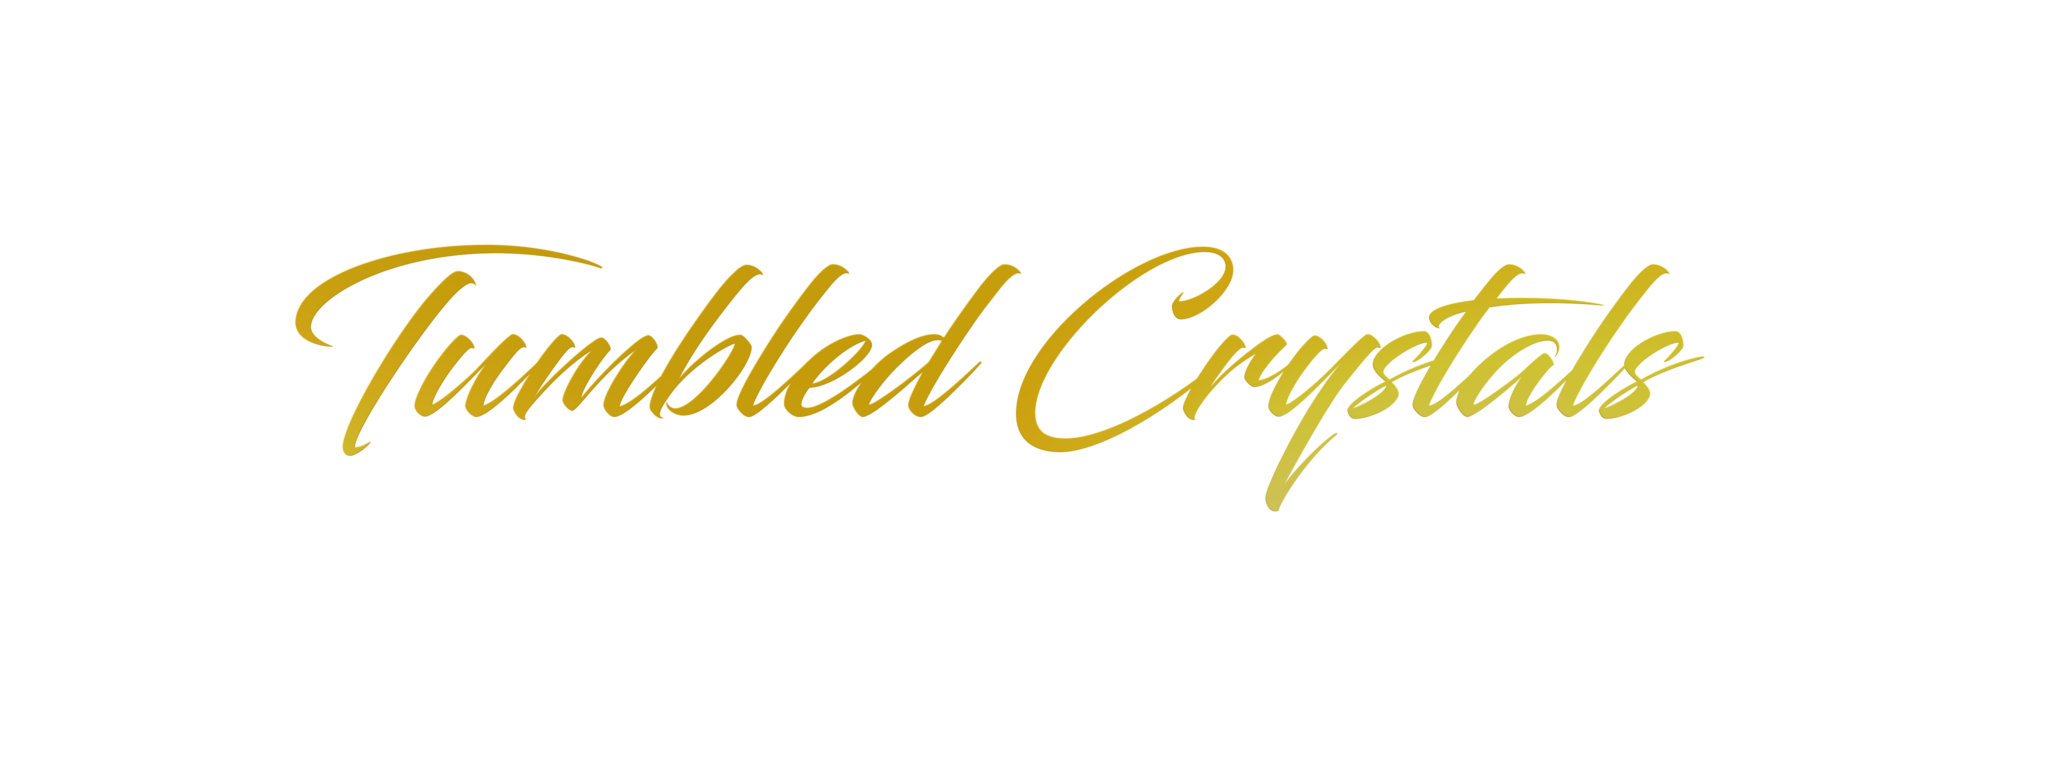 Gold Tumbled Crystals Lettering Group